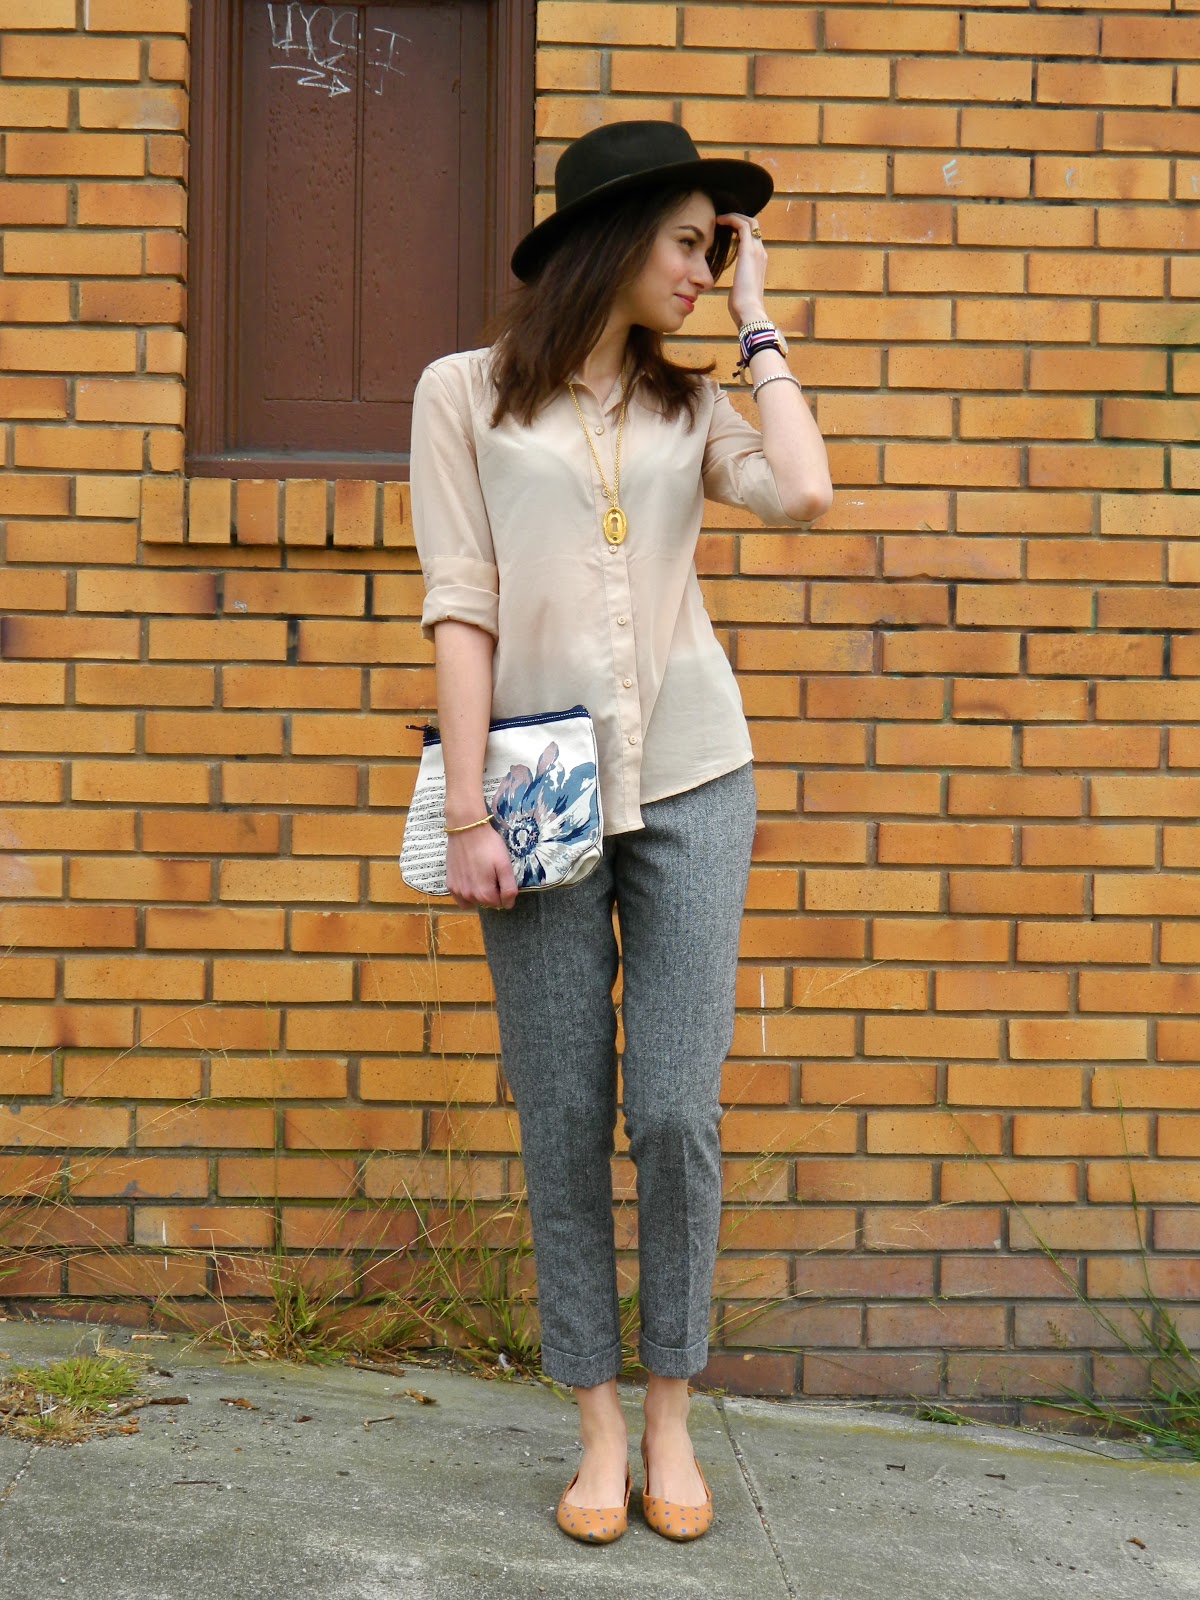 Effortlessly with roxy: Eye Candy: Effortless Anthro Reader Outfits!